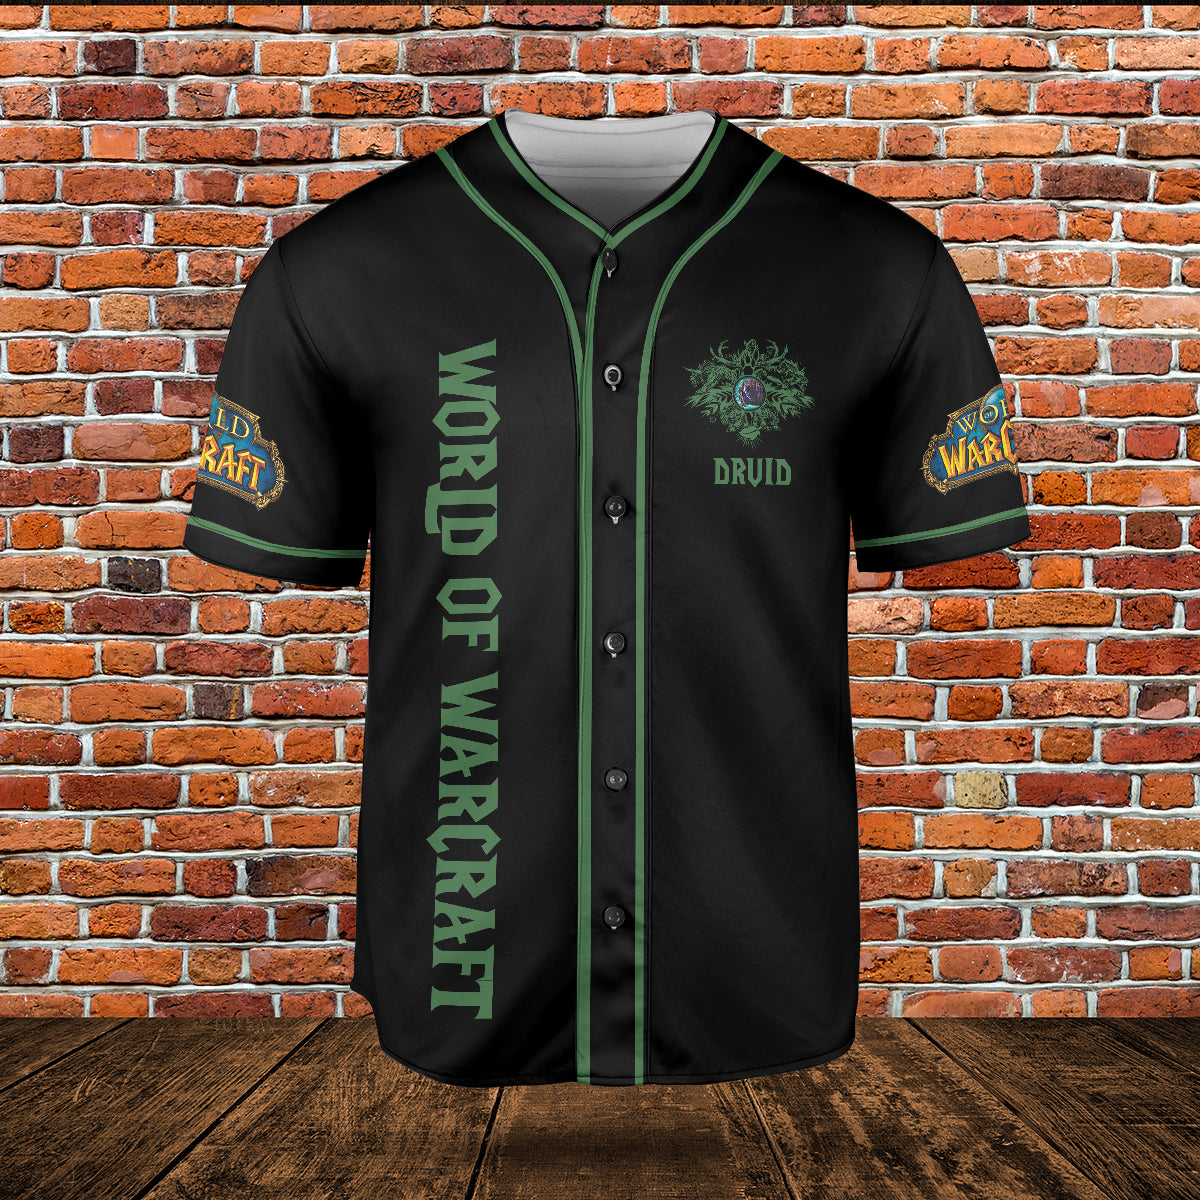 Feral Druid Wow Collection AOP Baseball Jersey